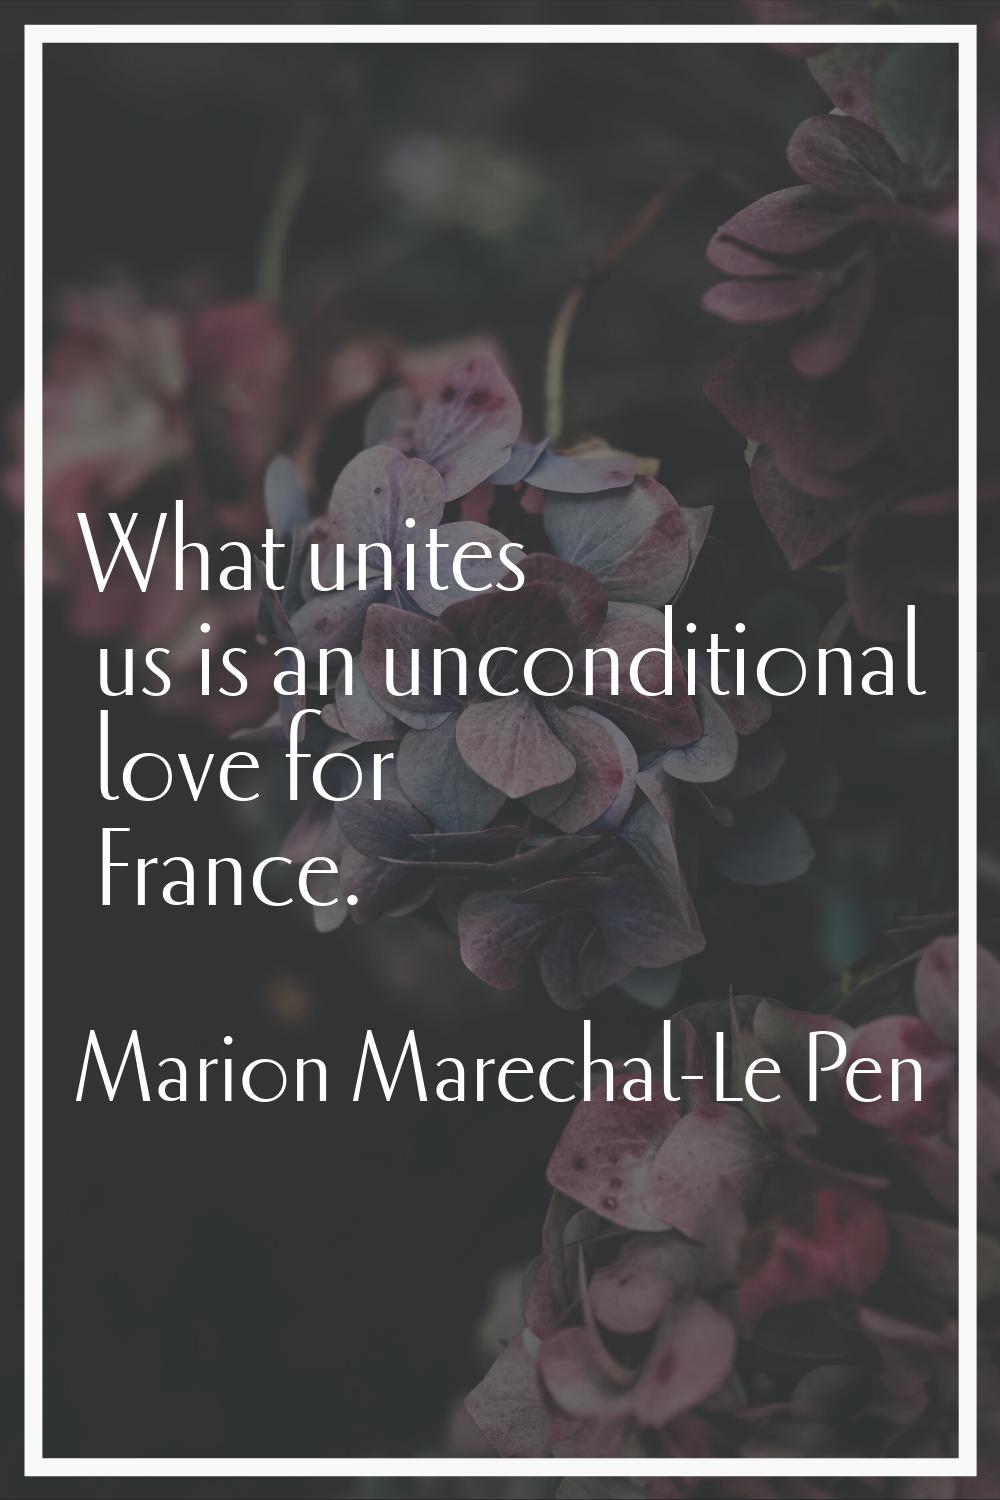 What unites us is an unconditional love for France.